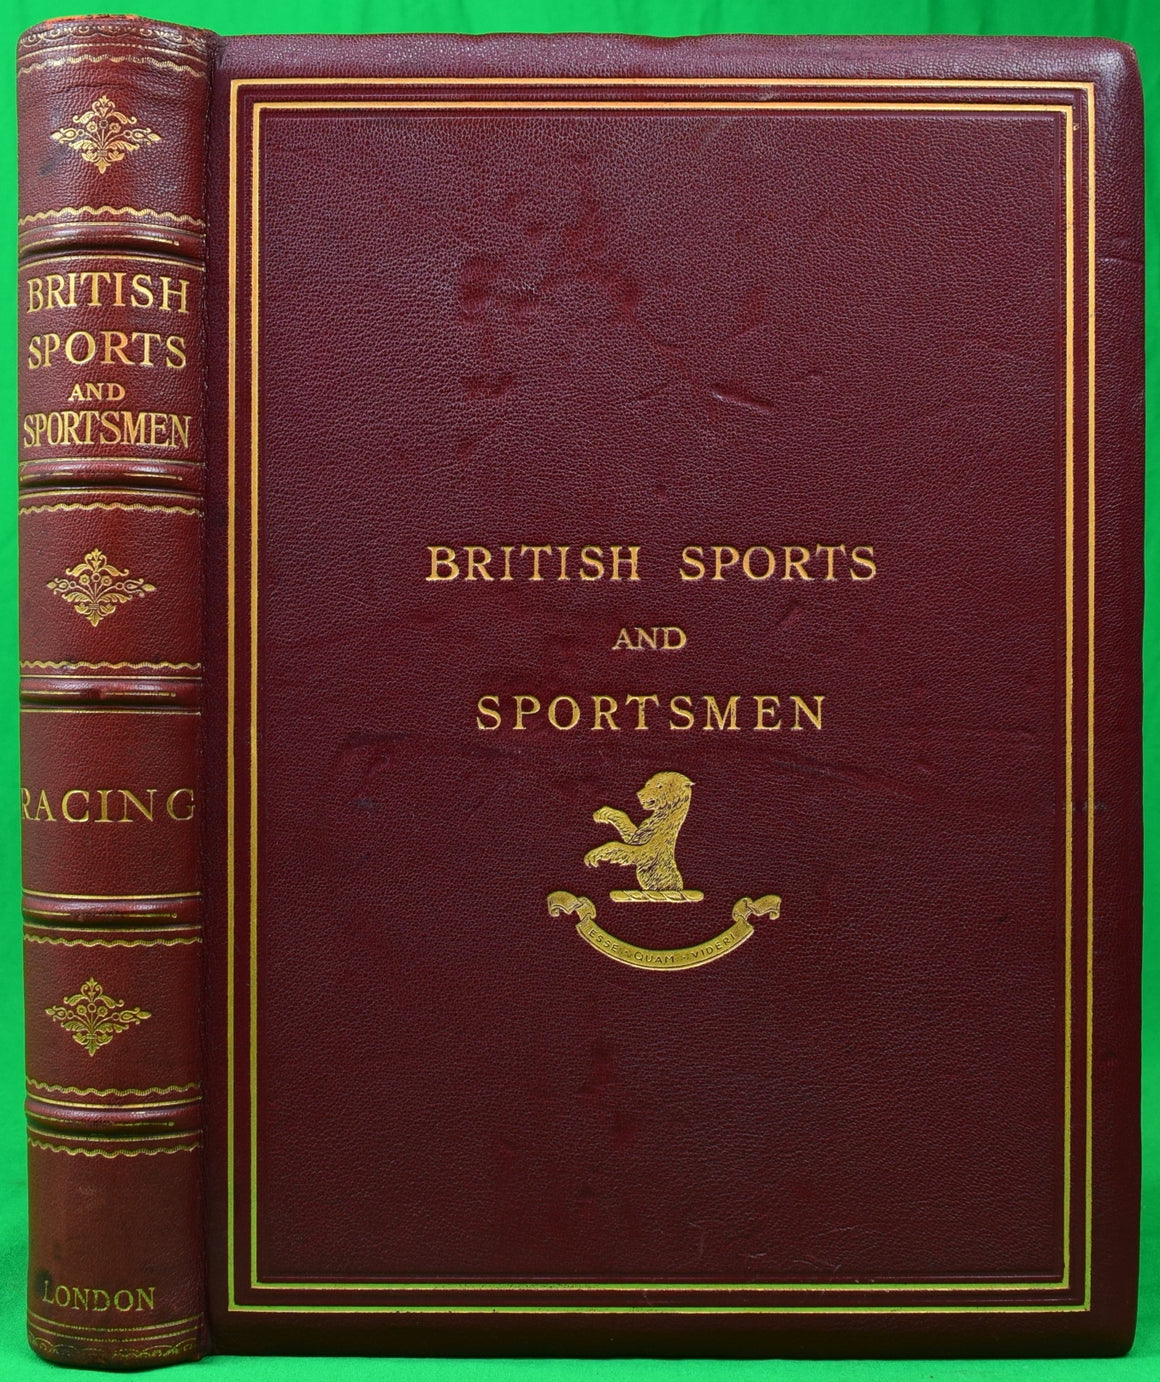 "British Sports And Sportsmen: Racing" 1920 "The Sportsman" [compiled and edited by]